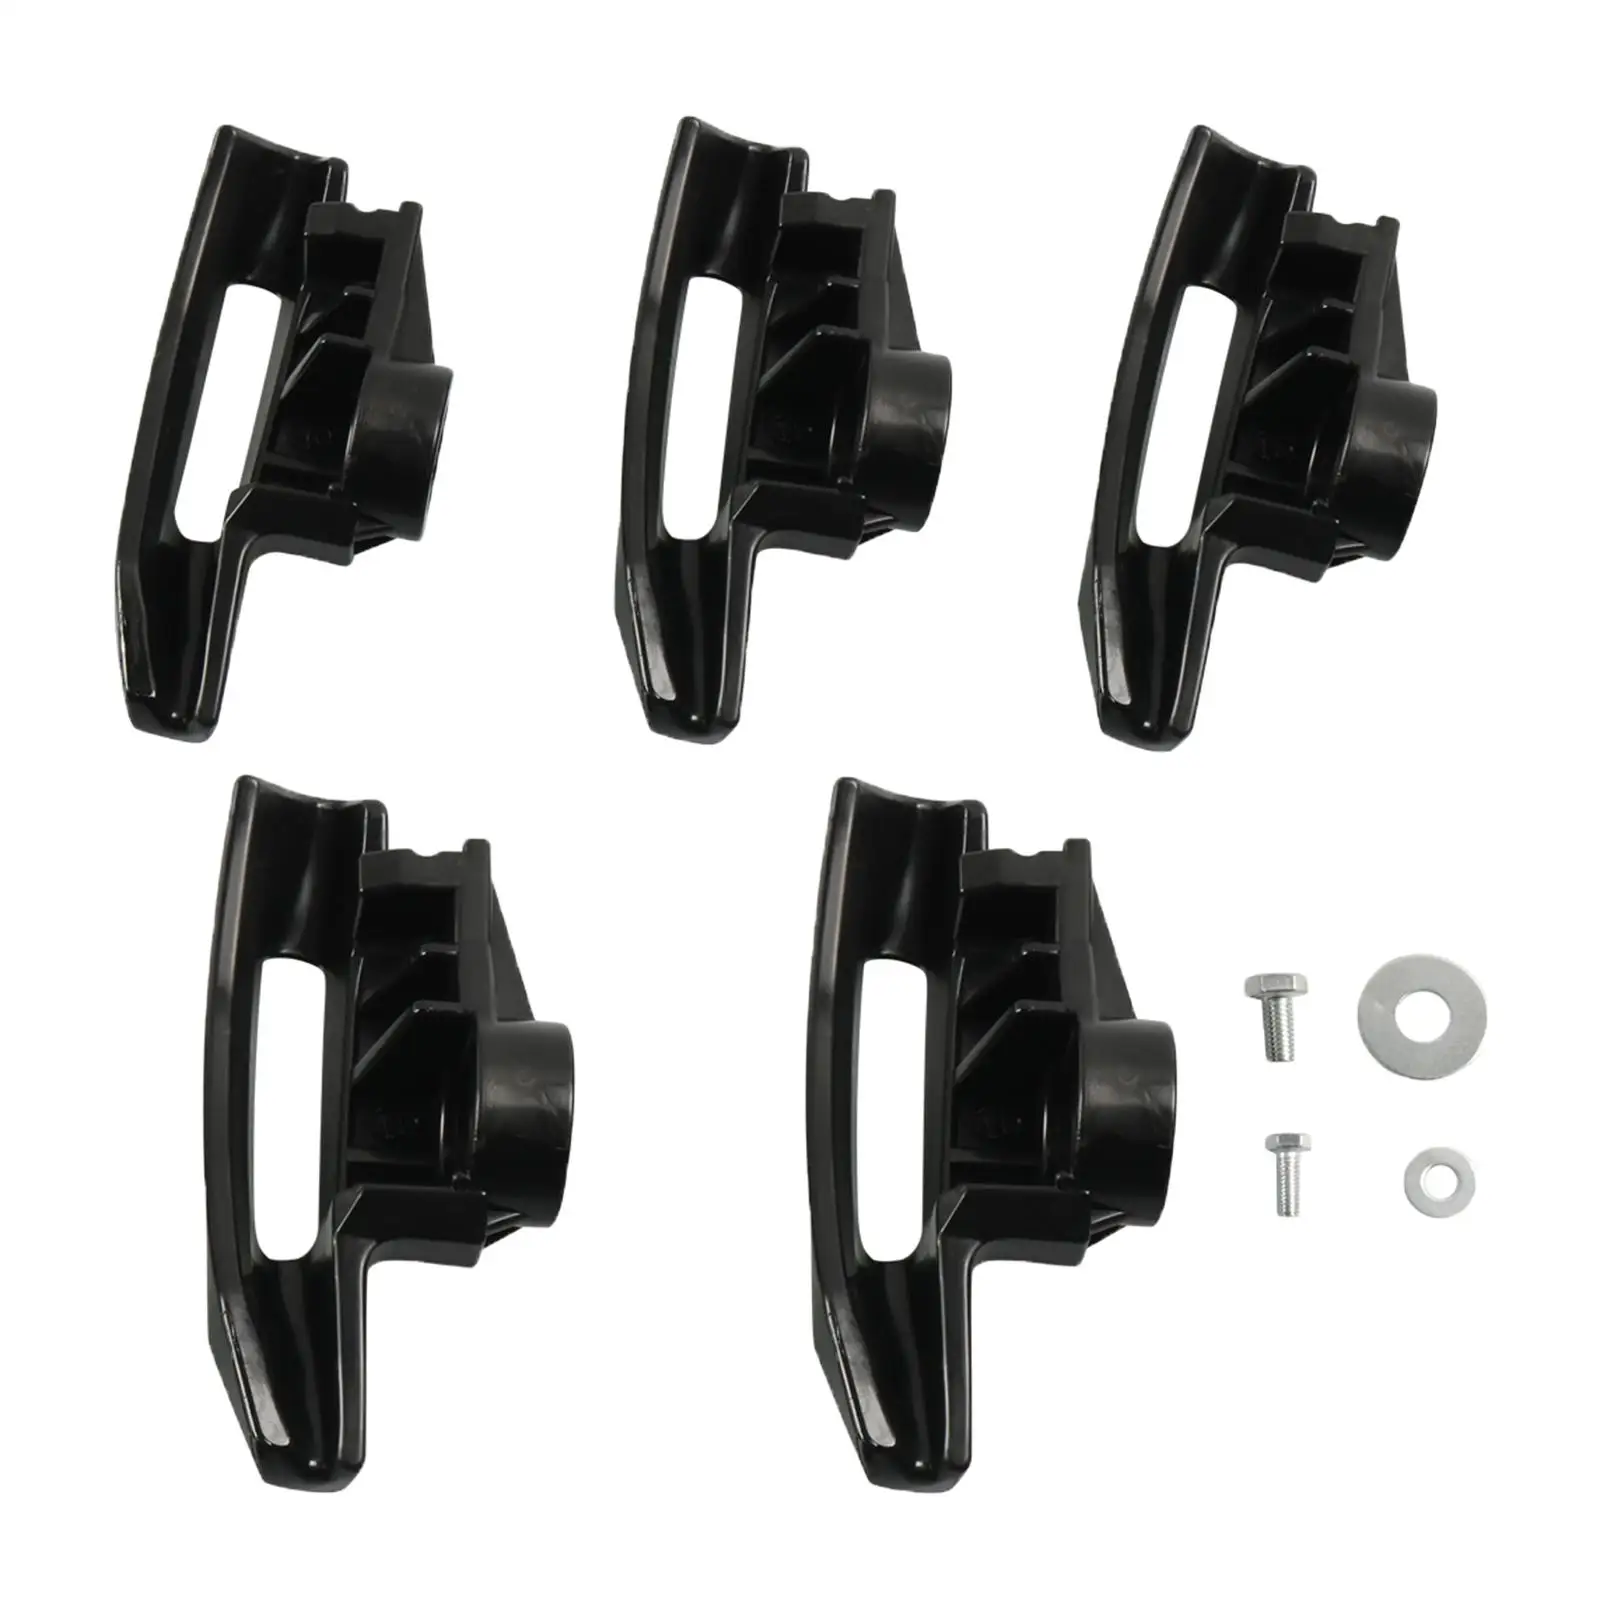 5 Pieces 8183061 Duck Head 8182960 Nylon Mount Demount Heads Tire Change Tool Fit for Coats 7655 7660 7665 7050 7055 7060 7065